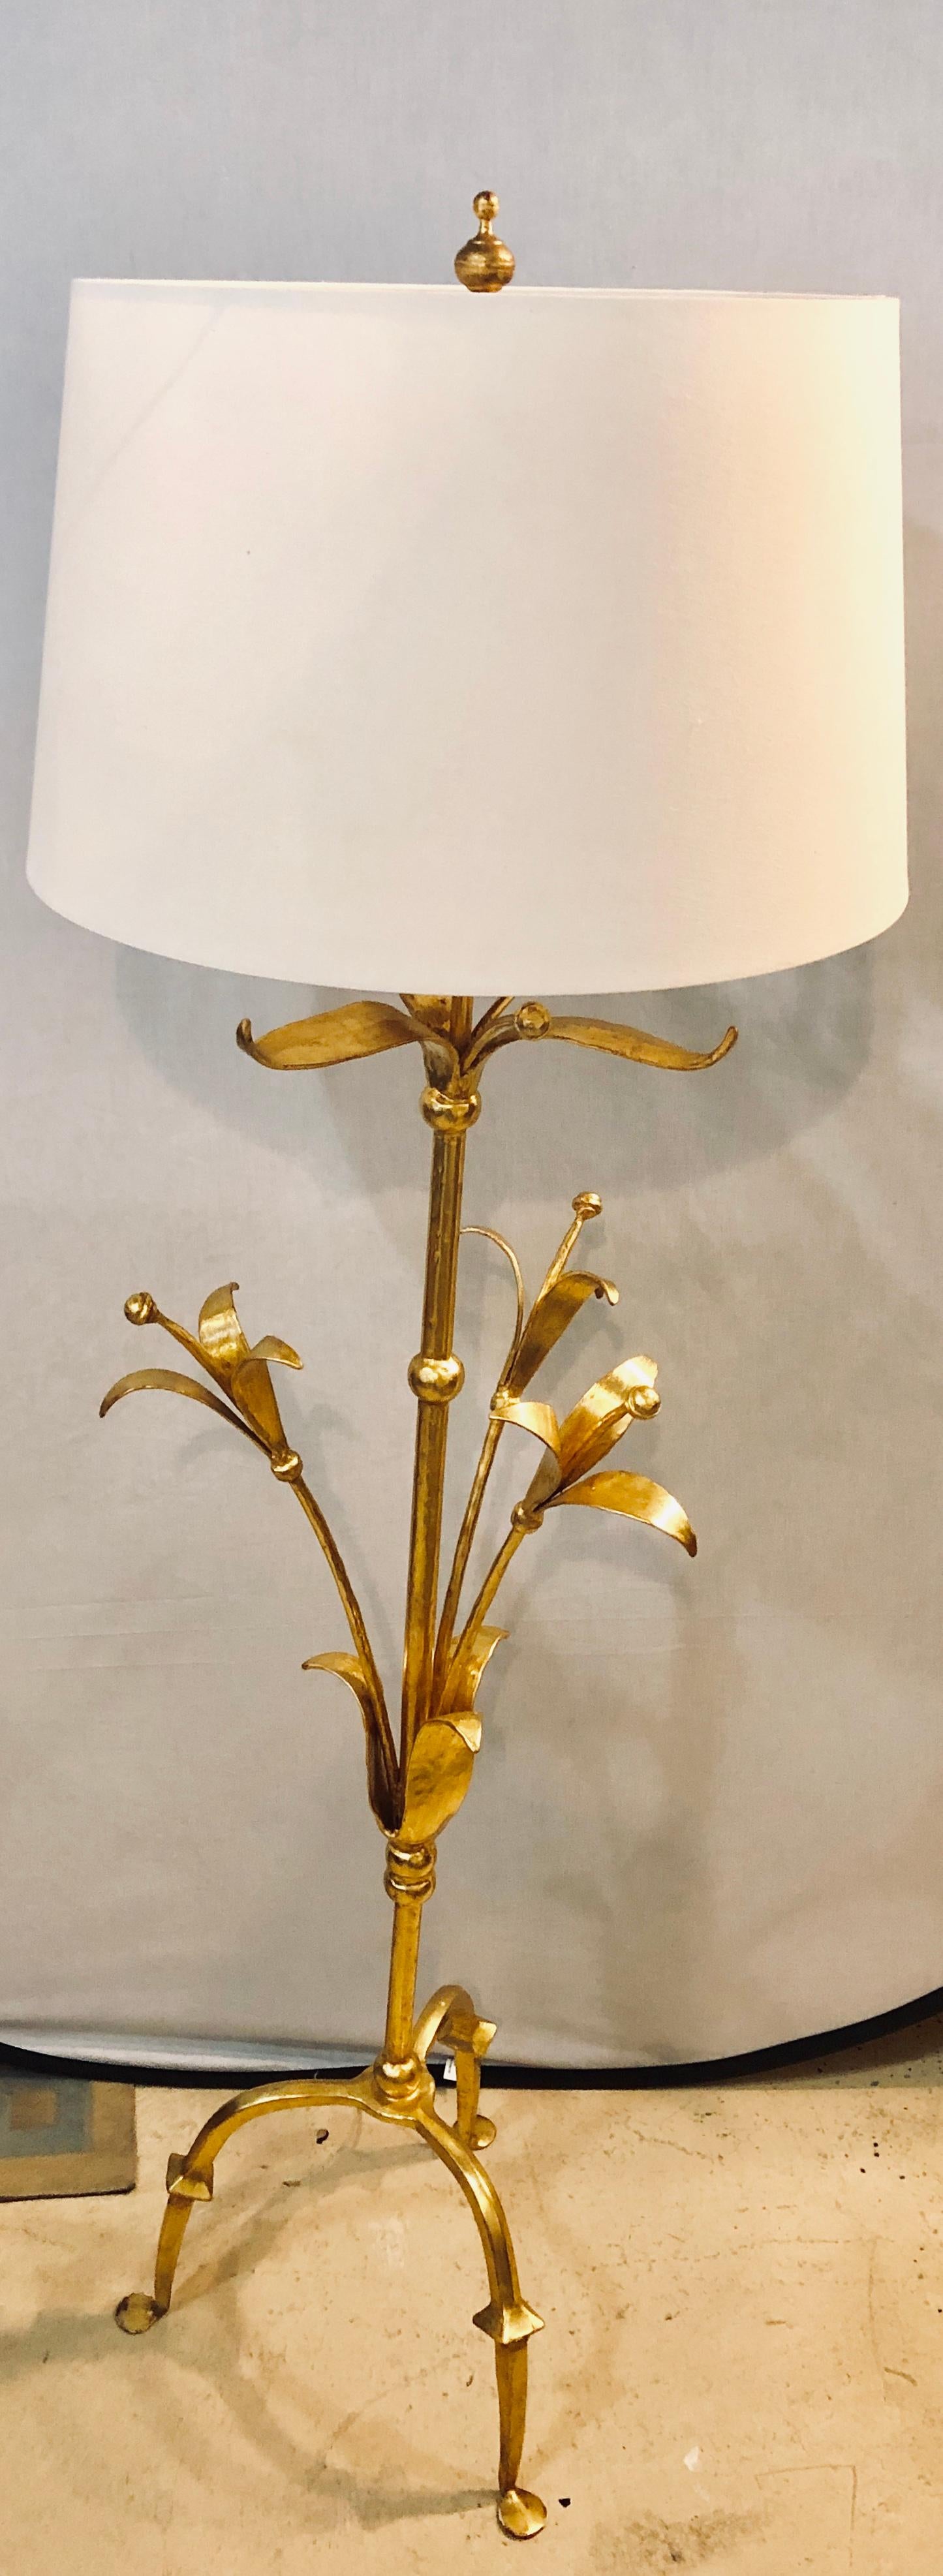 Bronze floor lamp designed and produced in France by an unknown designer. In the style of Mark Bankowsky.

Mid-century modern tulip form solid bronze floor standing or tall lamp. This finely detailed standing or tall lamp is simply stunning with its